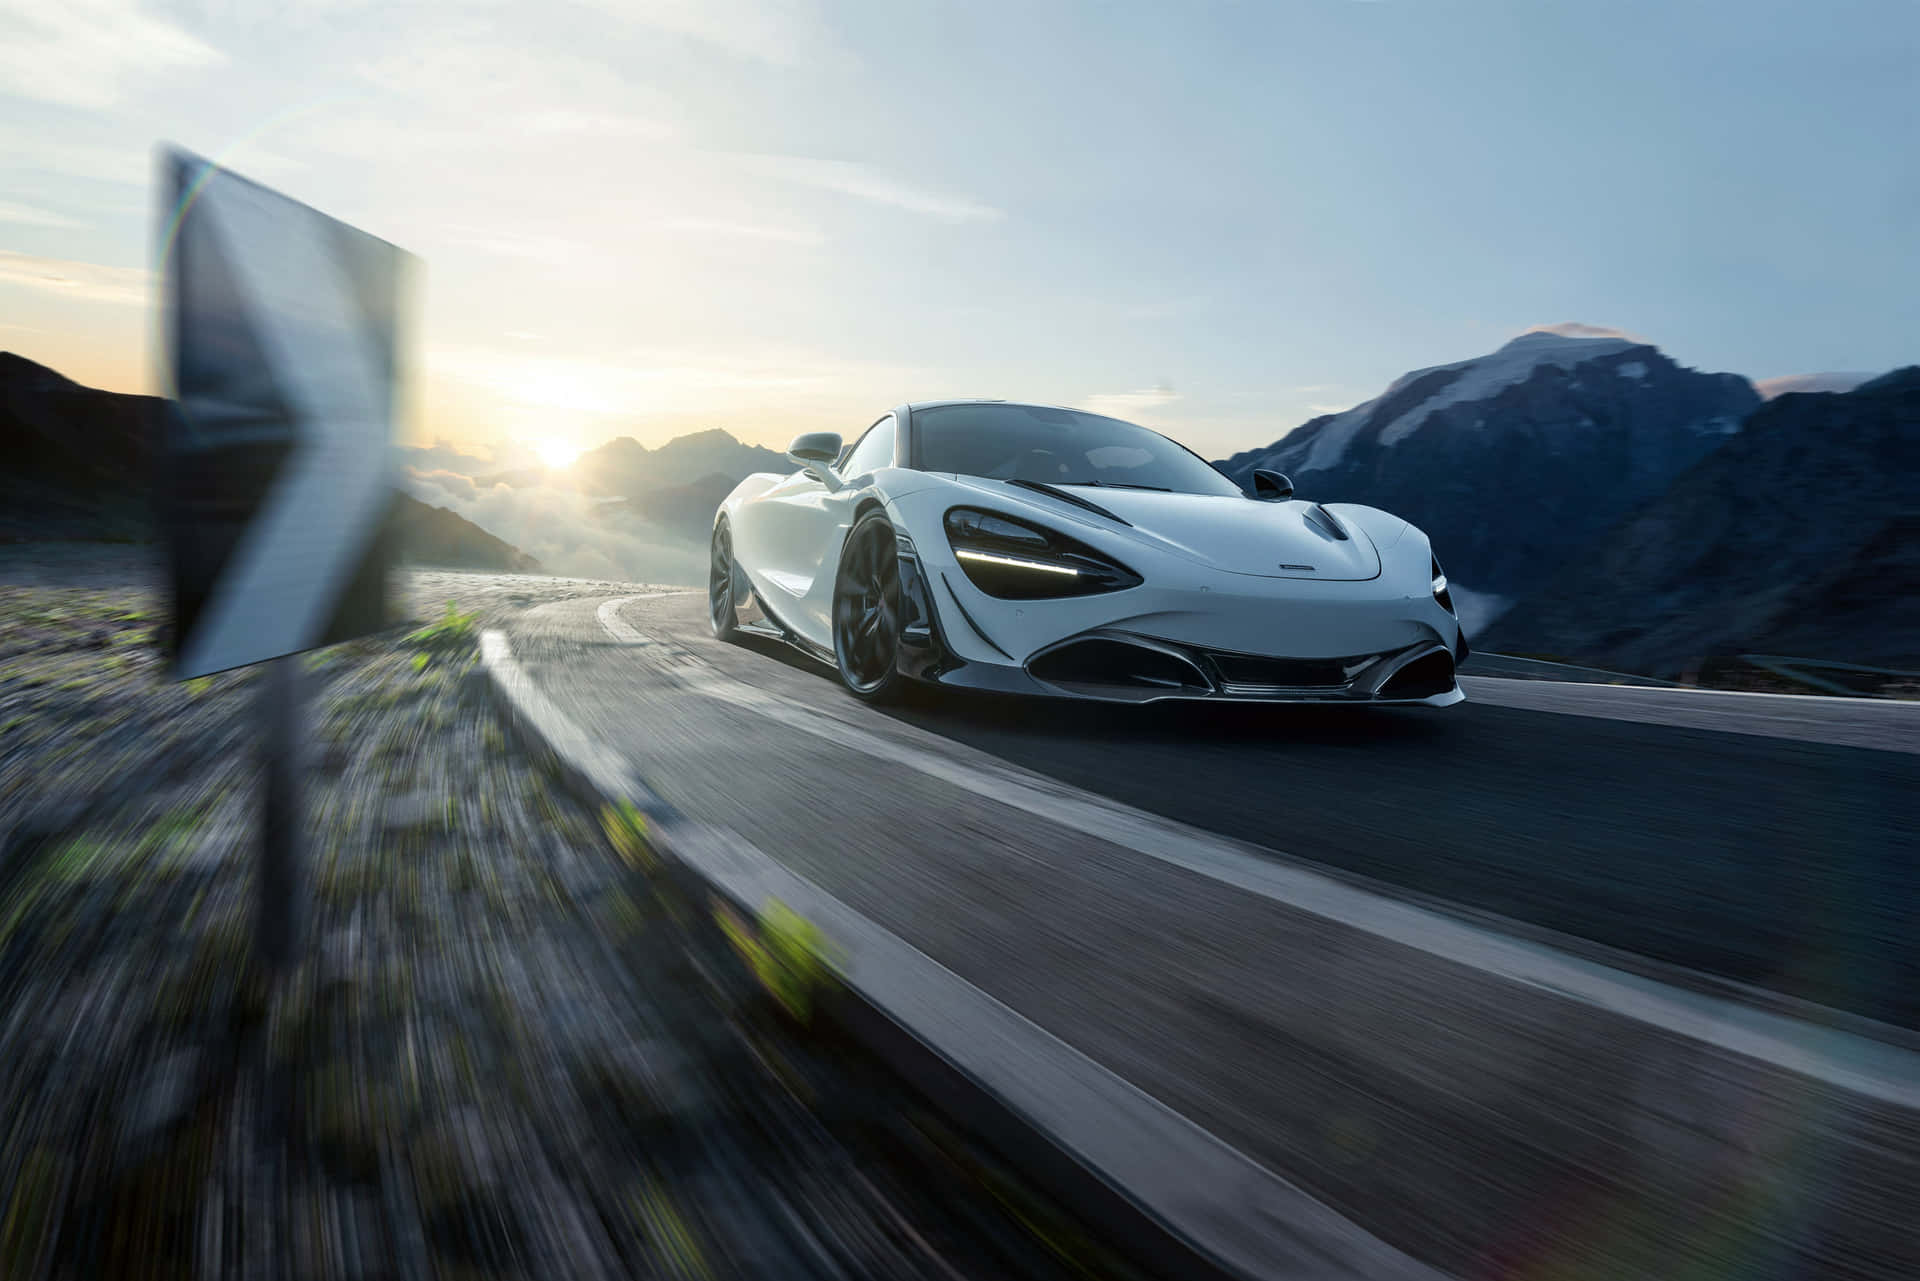 Experience sheer power by driving the McLaren 720s